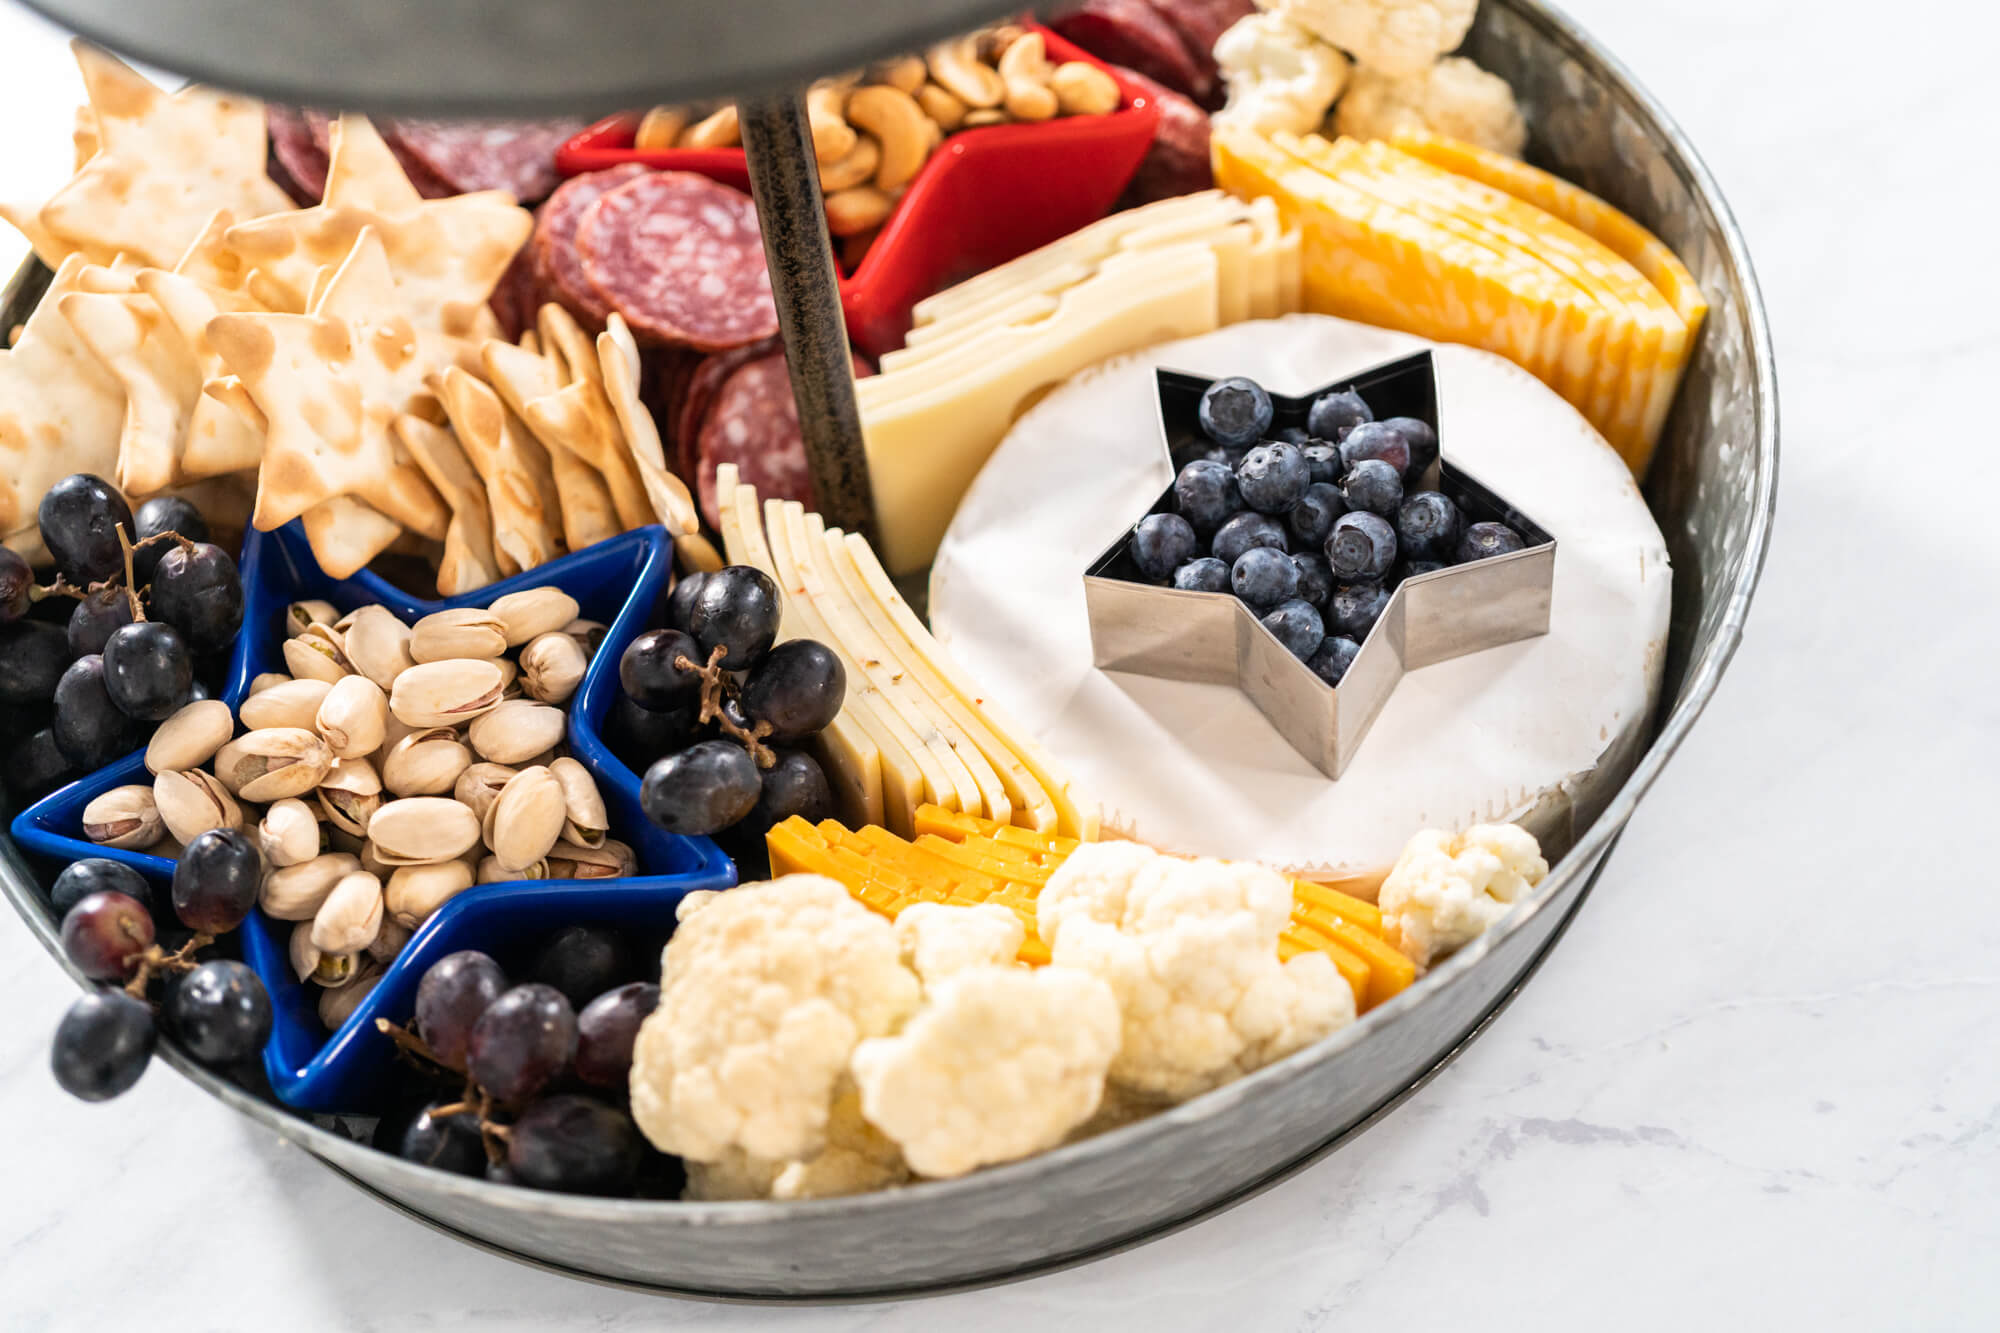 How to Make a Movie Night Charcuterie Board